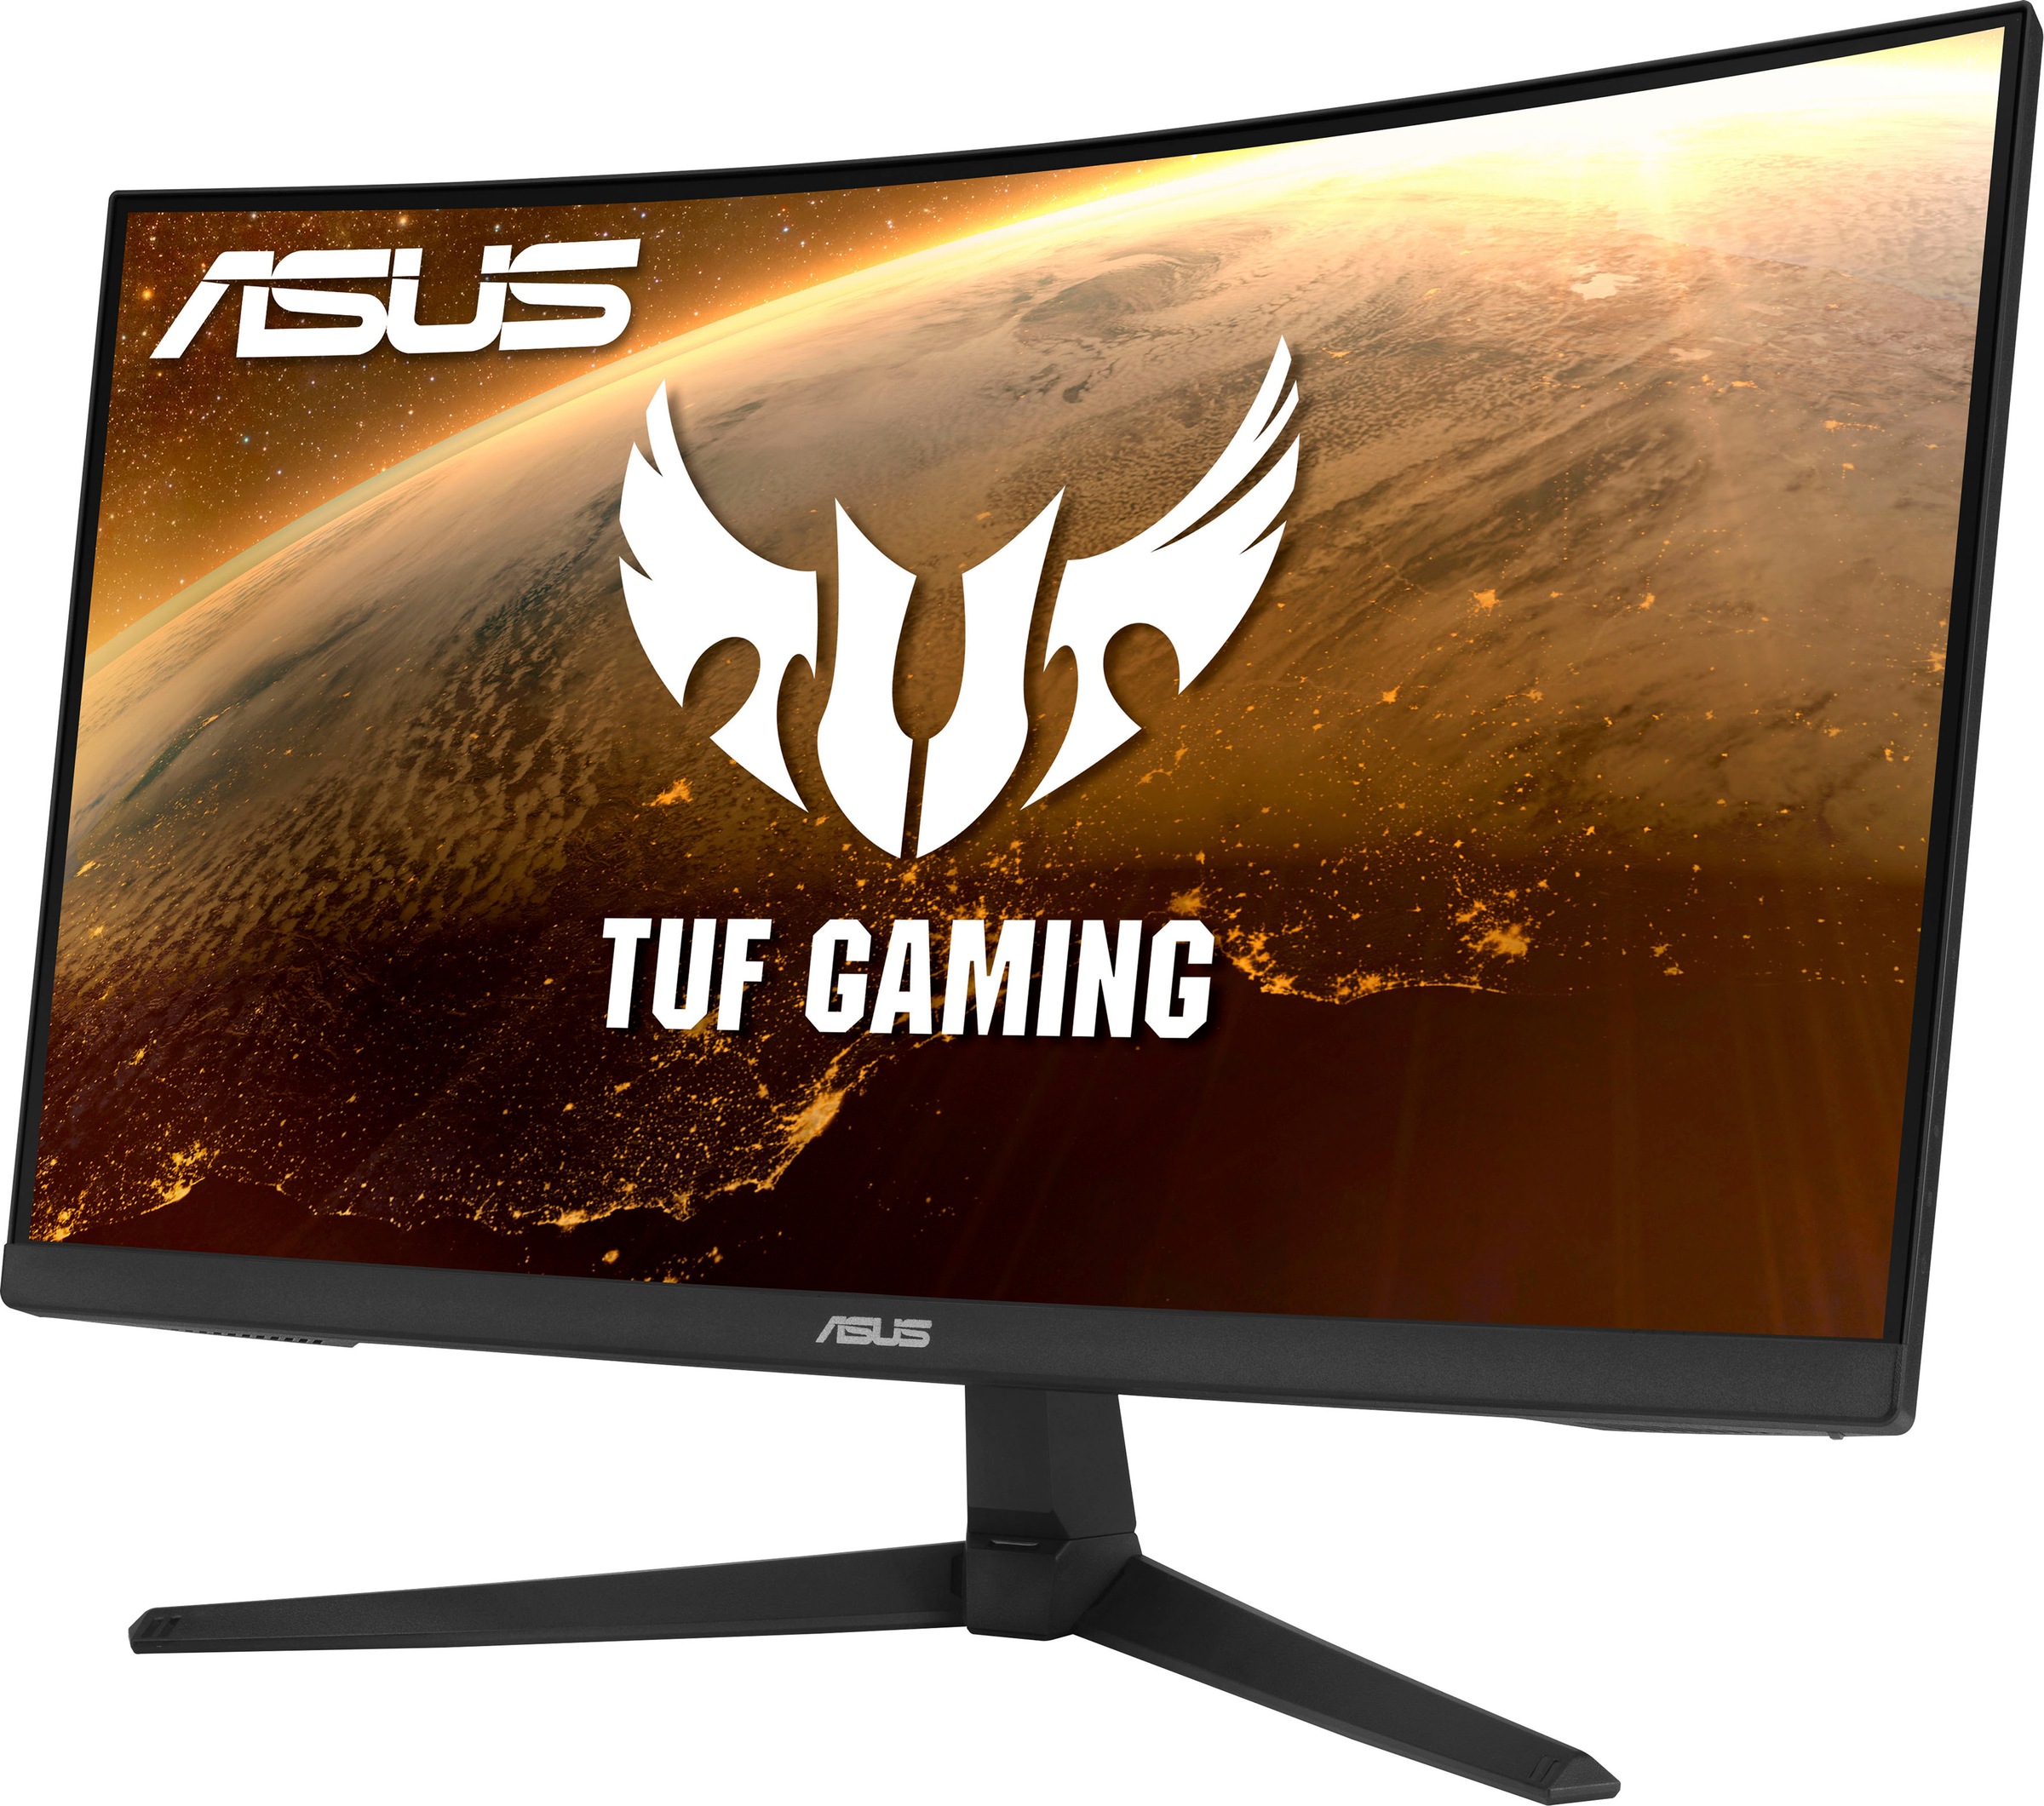 Asus LED-Monitor »ASUS Monitor«, 60,5 cm/23,8 Zoll, 1920 x 1080 px, Full HD, 1 ms Reaktionszeit, 165 Hz